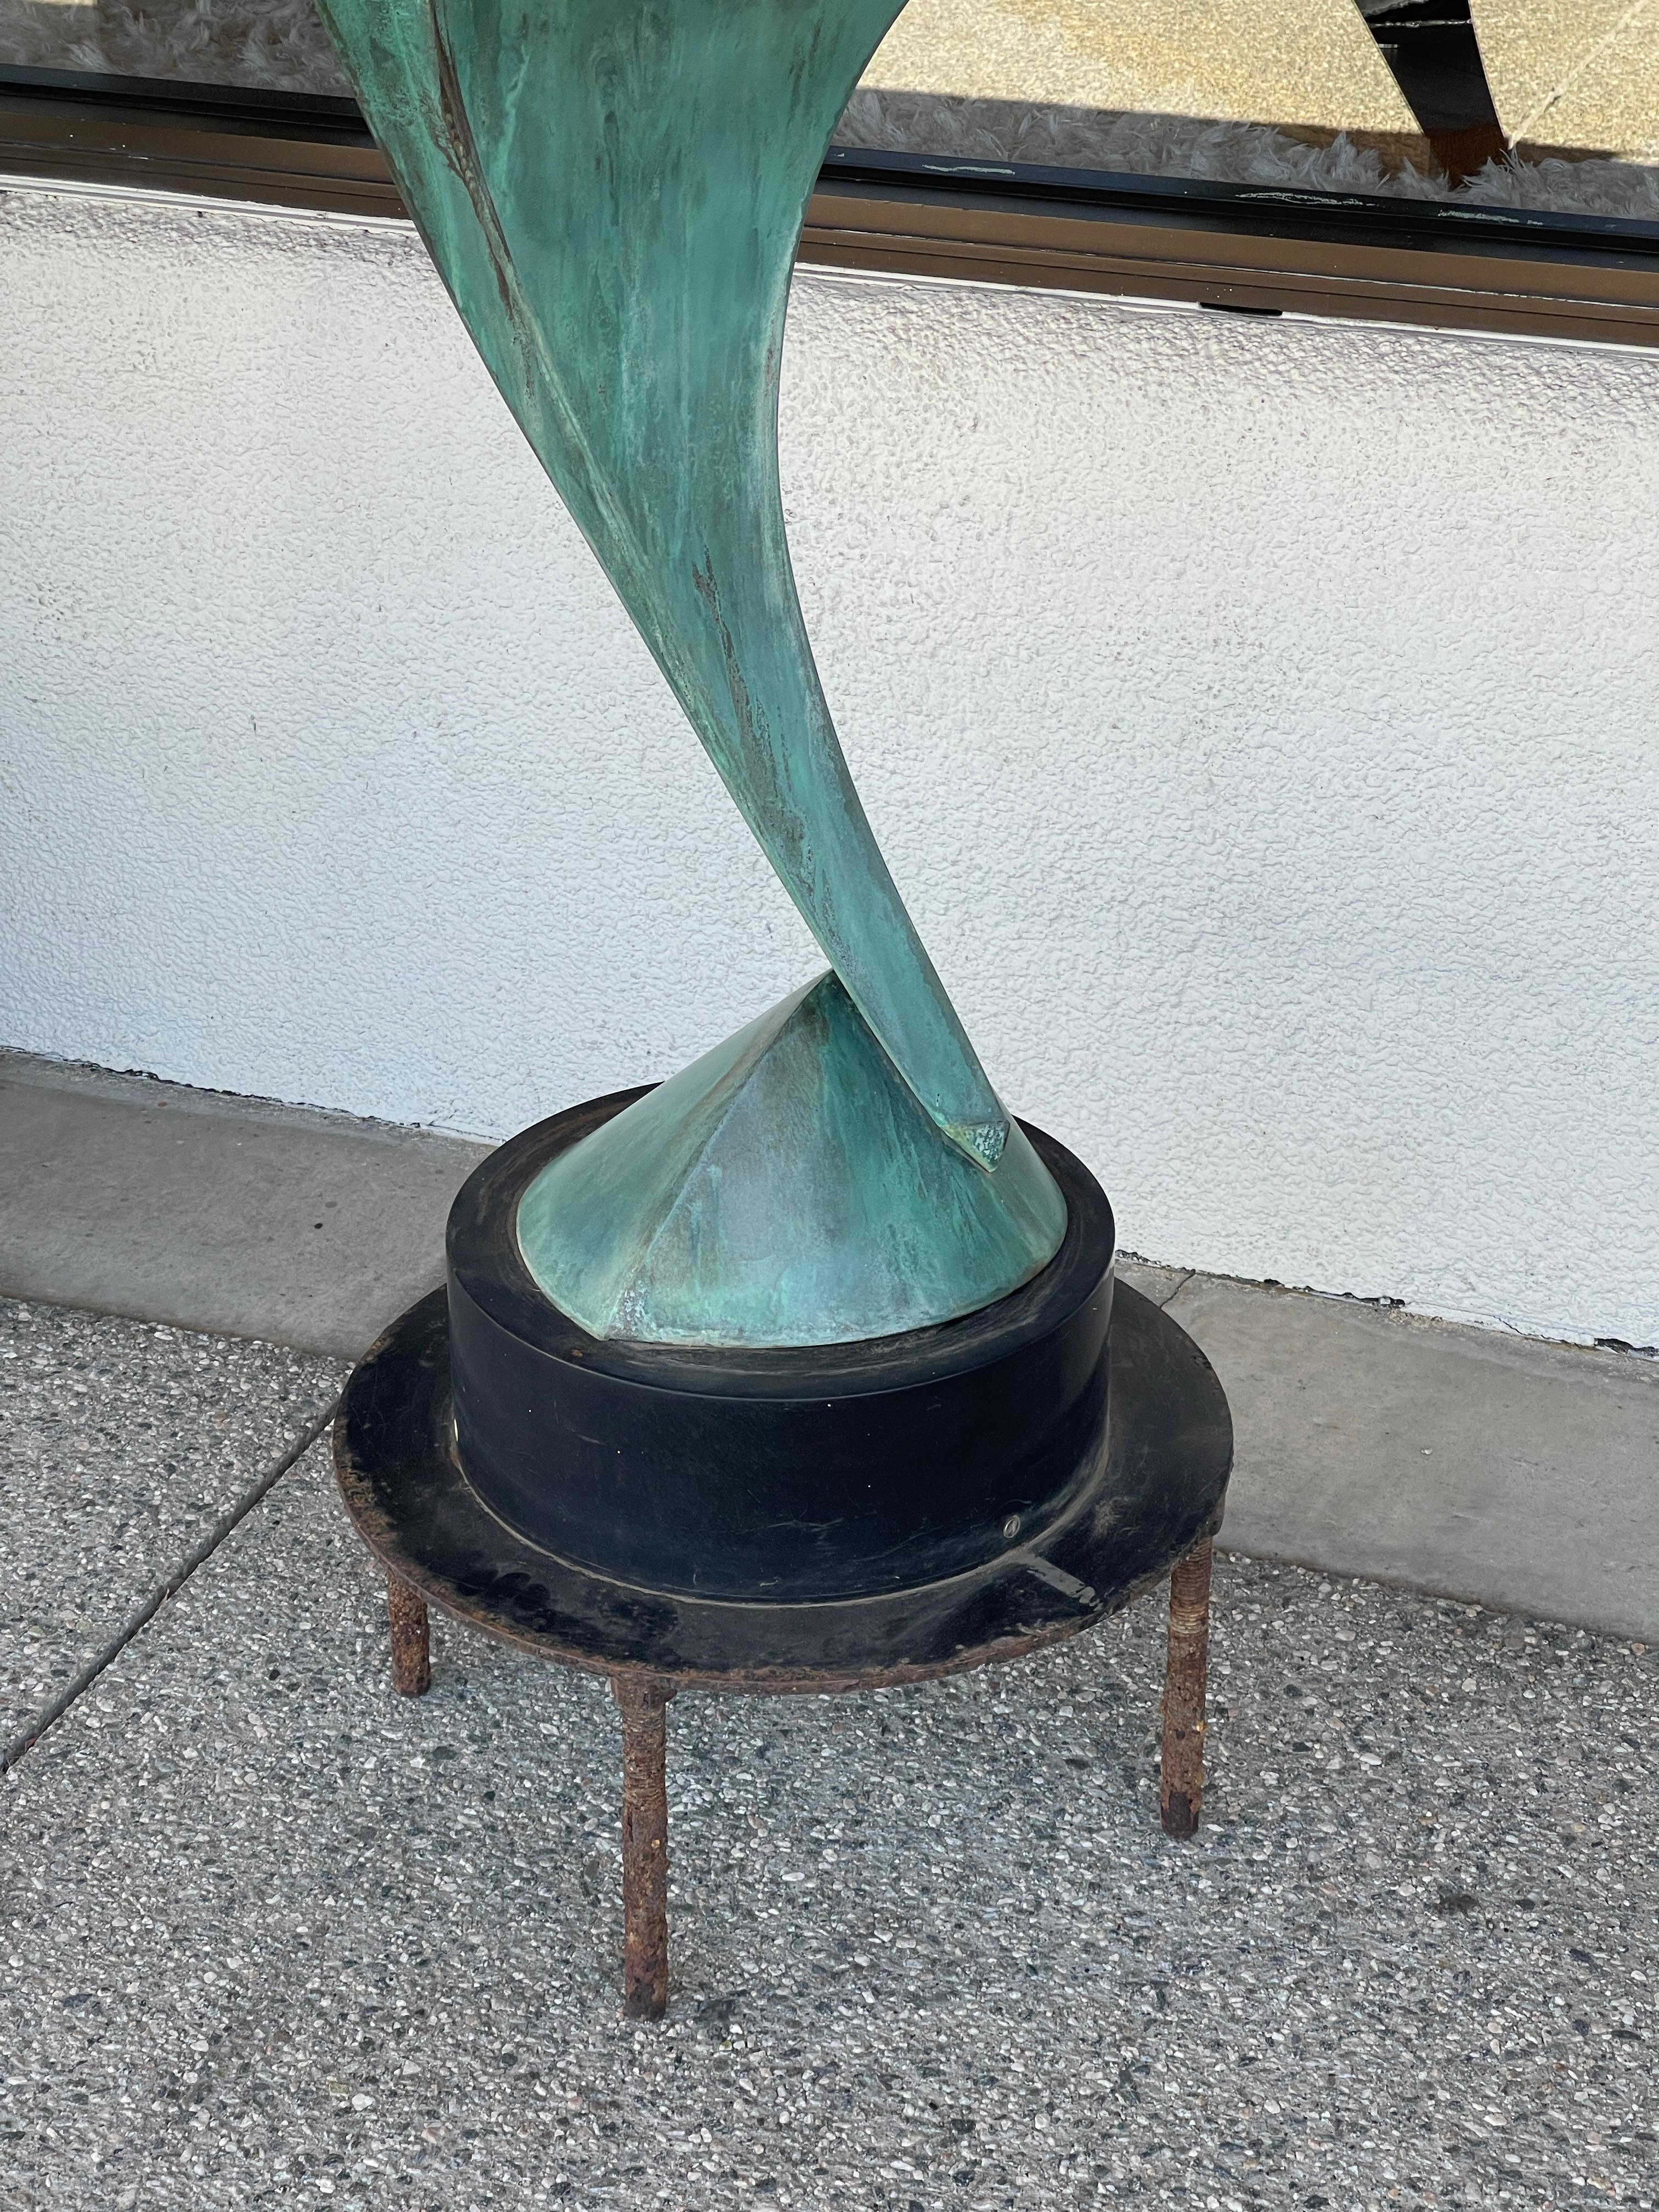 Beautiful Verdigris Copper Abstract Sculpture by Lyle London 5